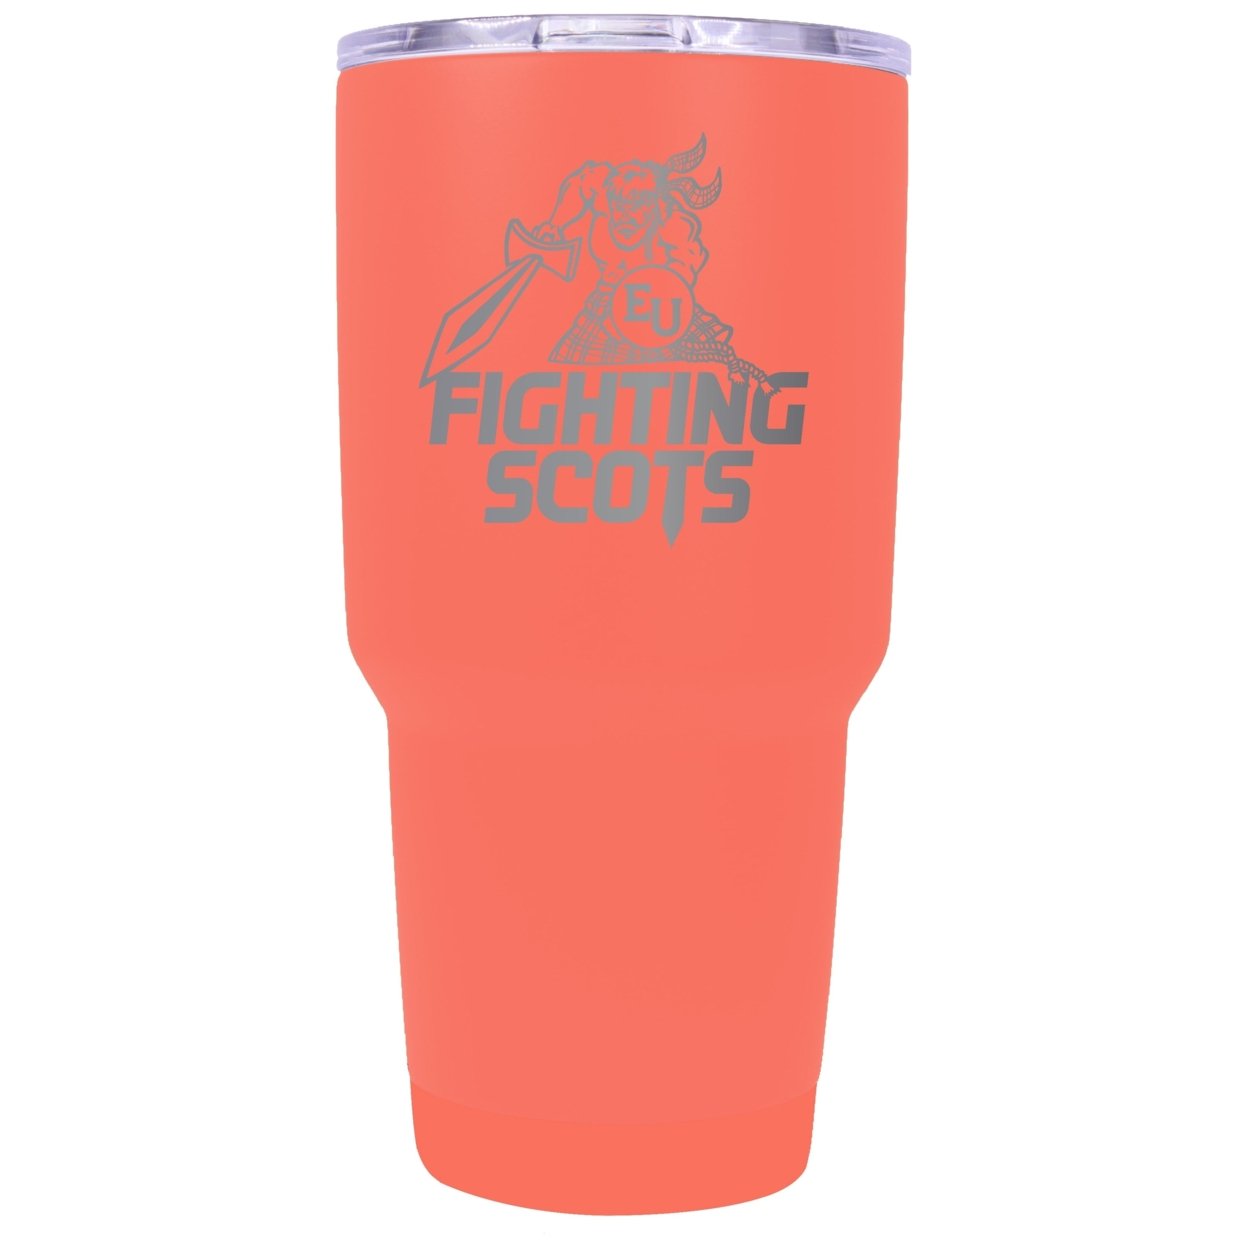 Edinboro University 24 Oz Laser Engraved Stainless Steel Insulated Tumbler - Choose Your Color. - Coral